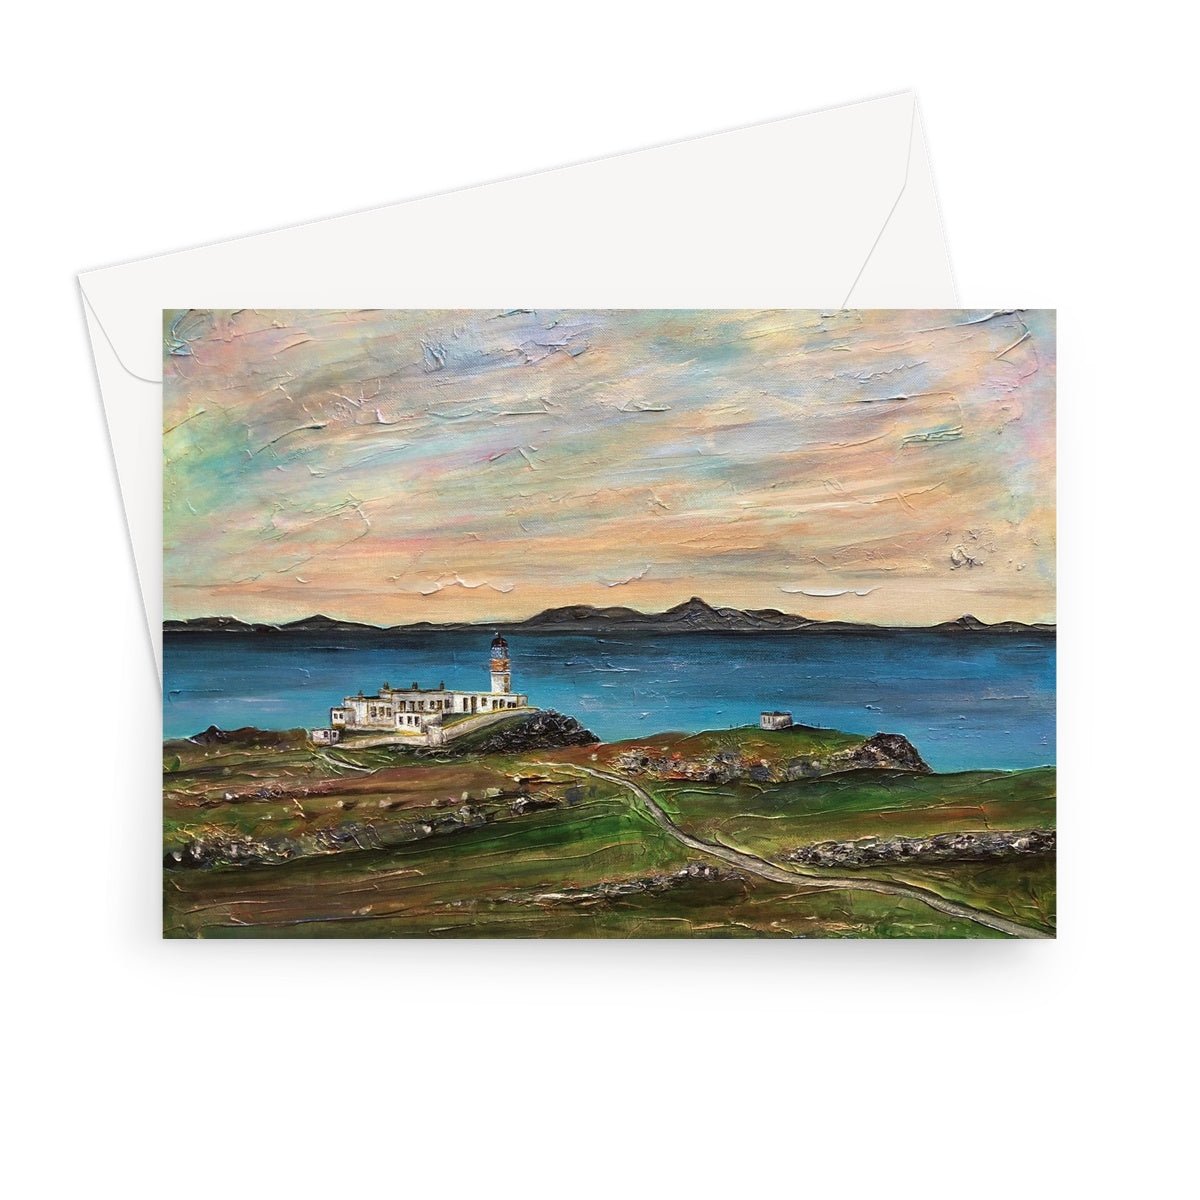 Neist Point Skye Art Gifts Greeting Card-Greetings Cards-Skye Art Gallery-7"x5"-10 Cards-Paintings, Prints, Homeware, Art Gifts From Scotland By Scottish Artist Kevin Hunter